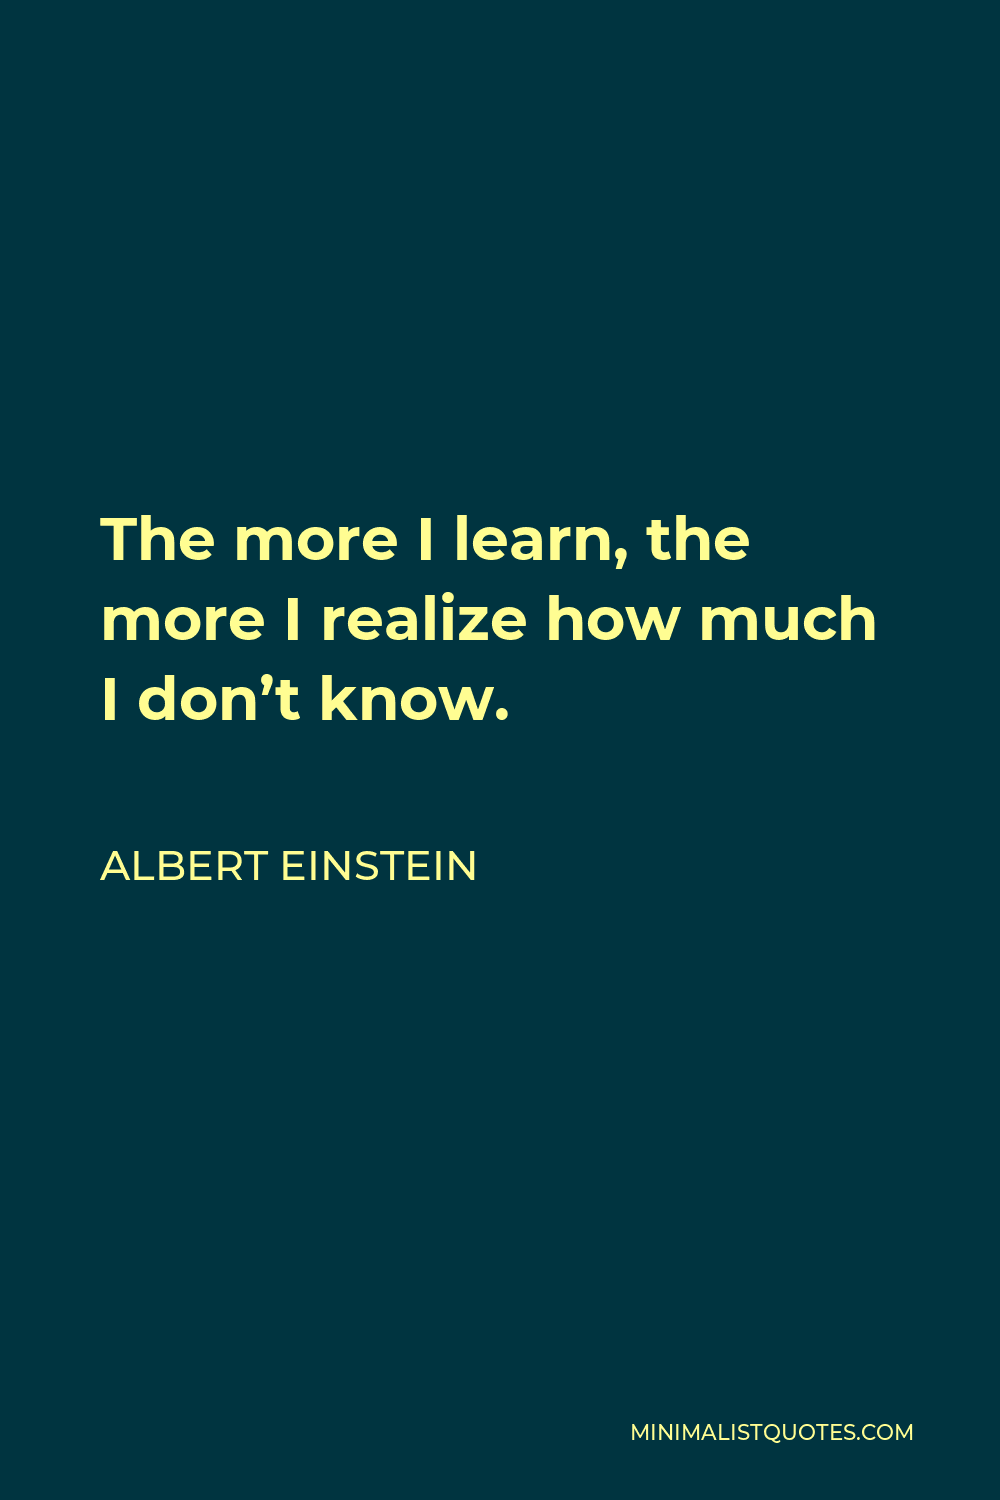 Albert Einstein Quote - The more I learn, the more I realize how much I don’t know.